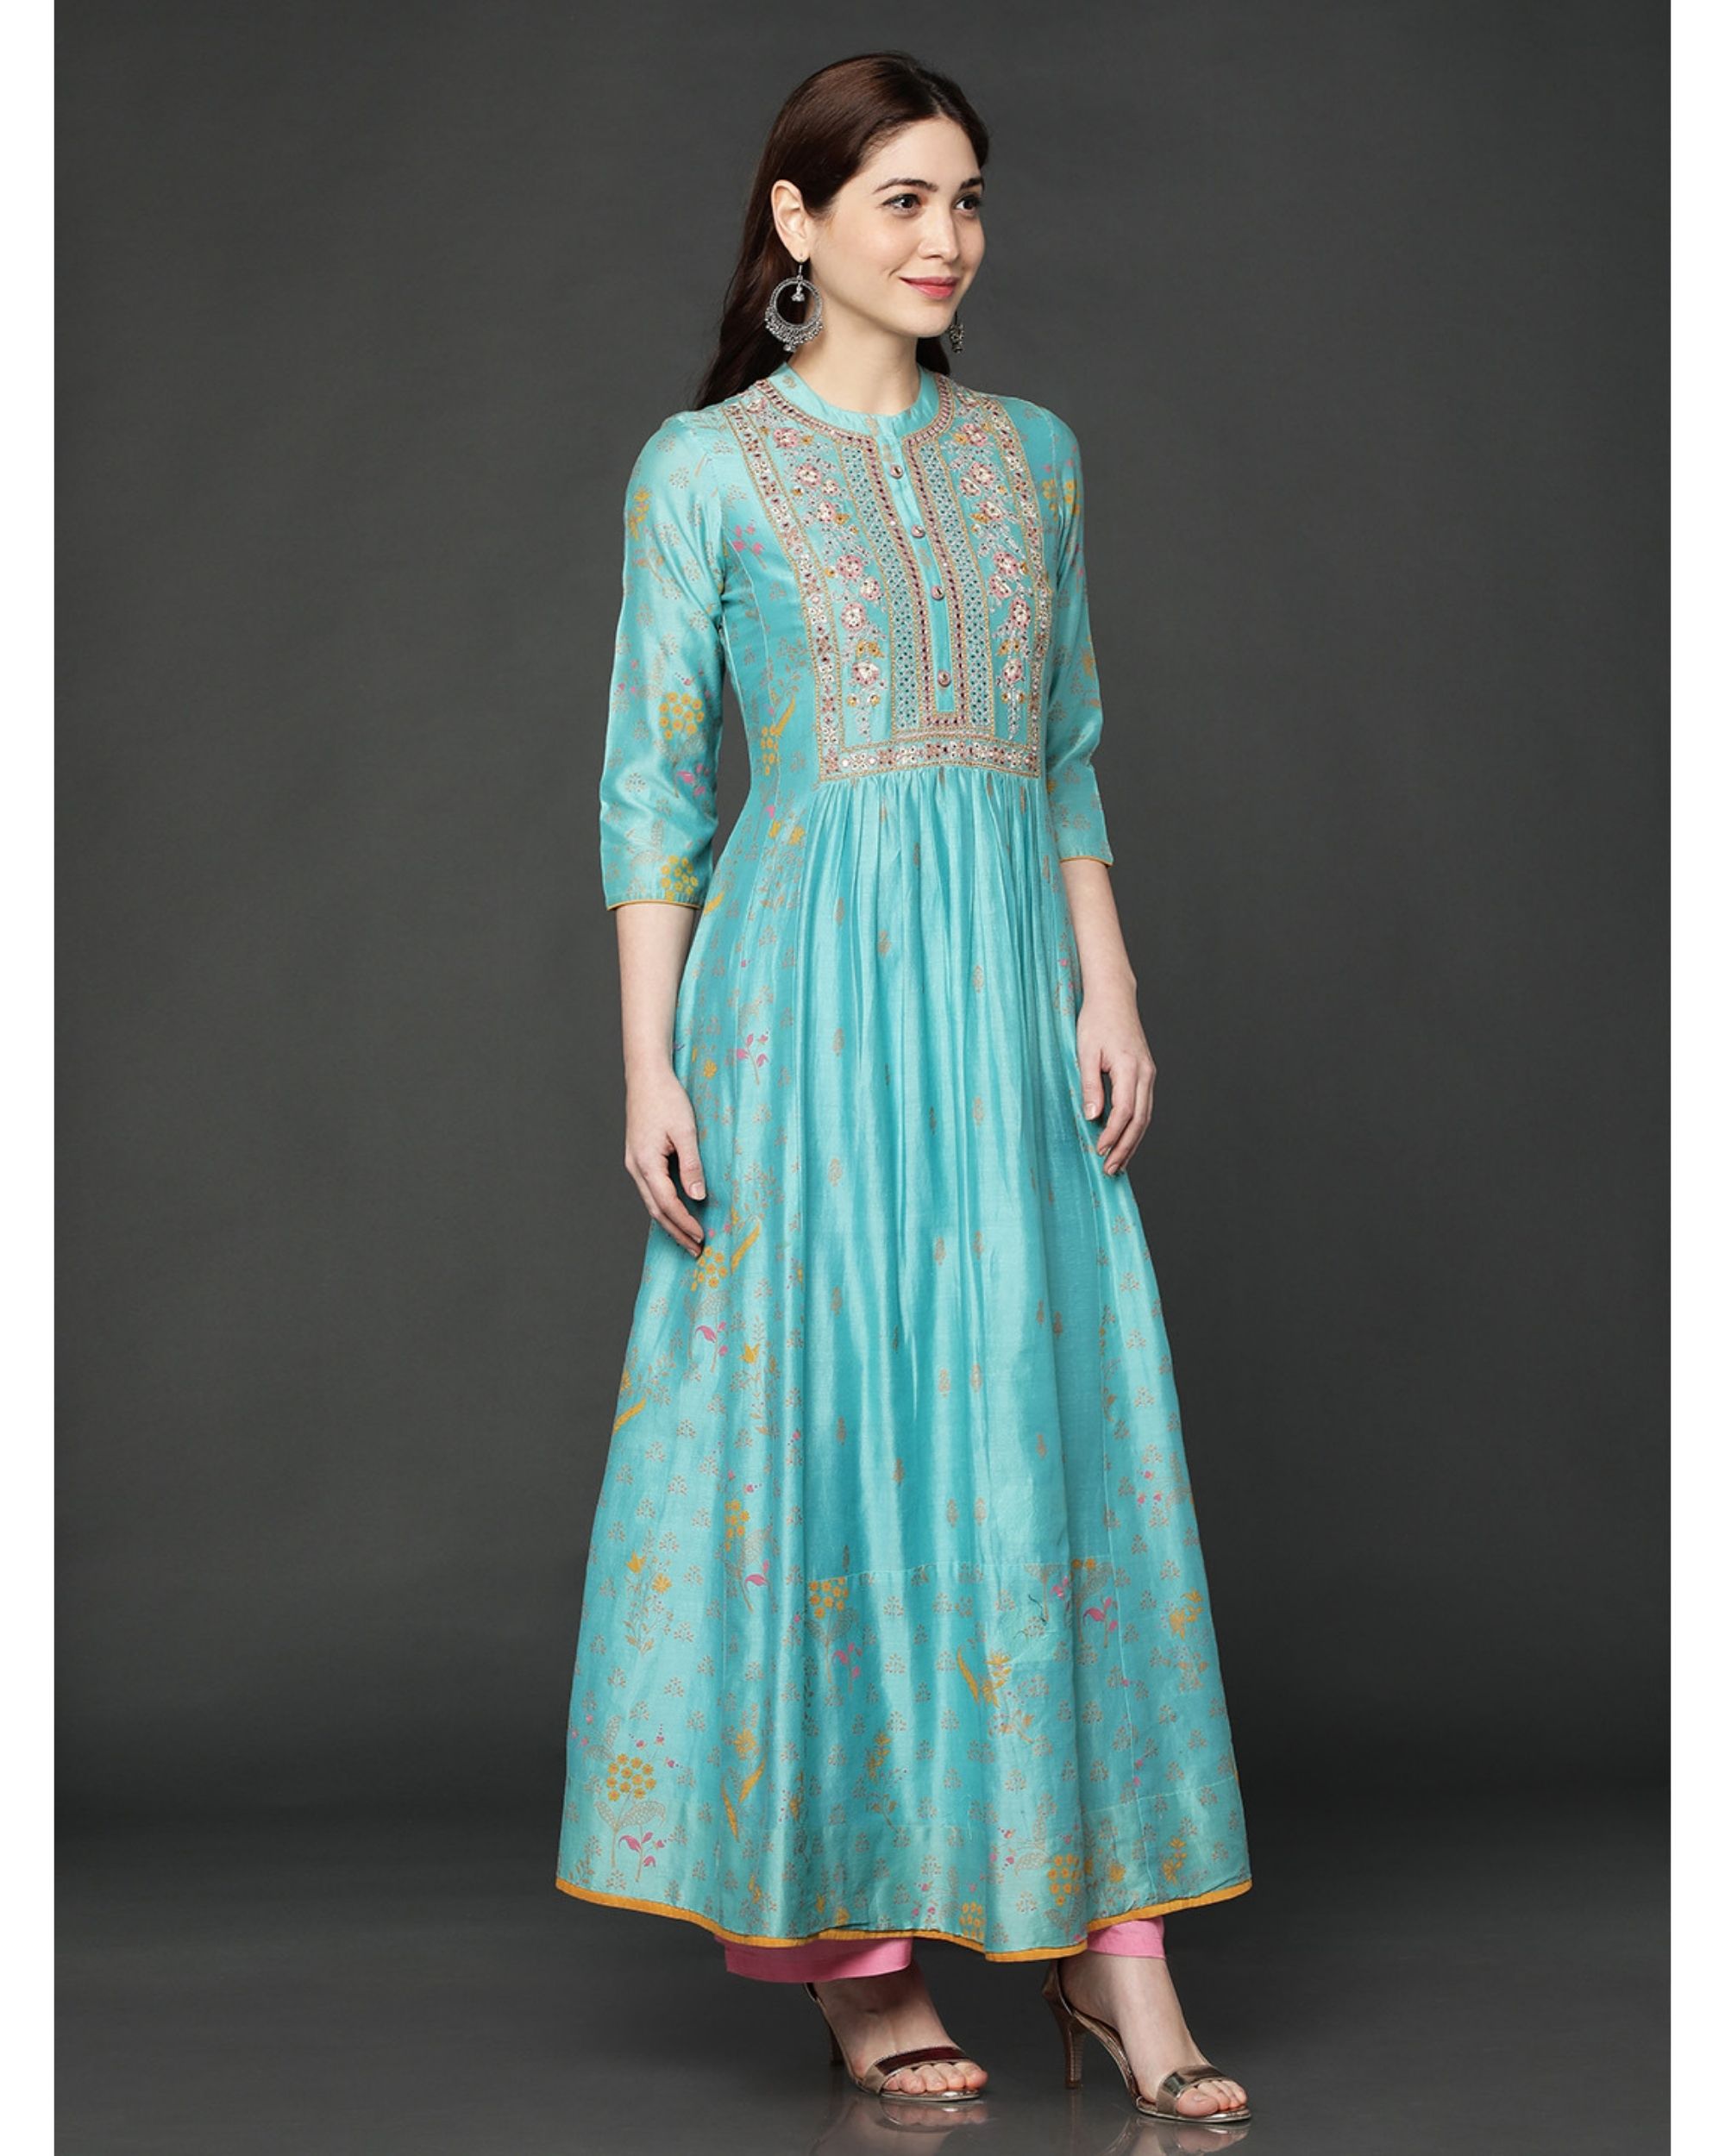 Turquoise embroidered dress by Ojas Designs | The Secret Label